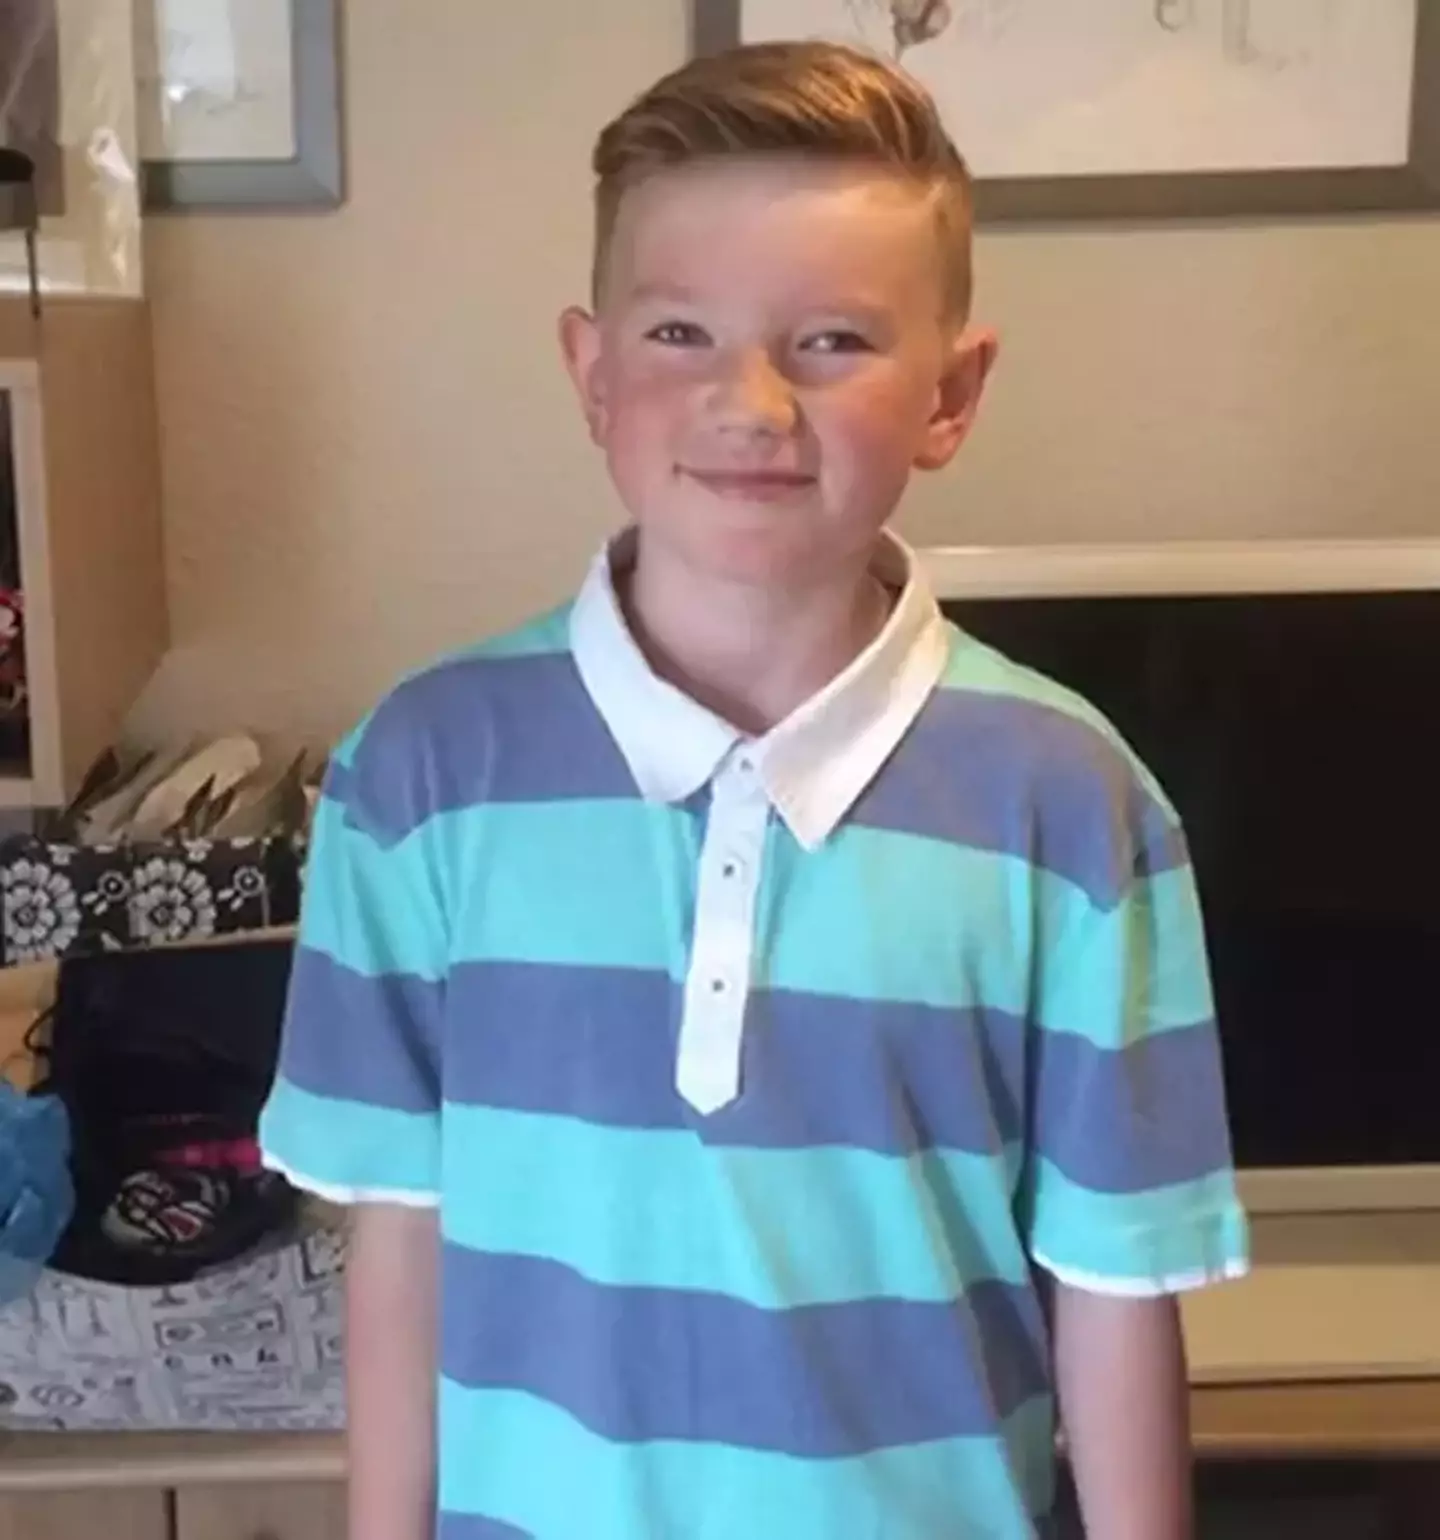 Alex Batty was just 11 when he went missing in October 2017.